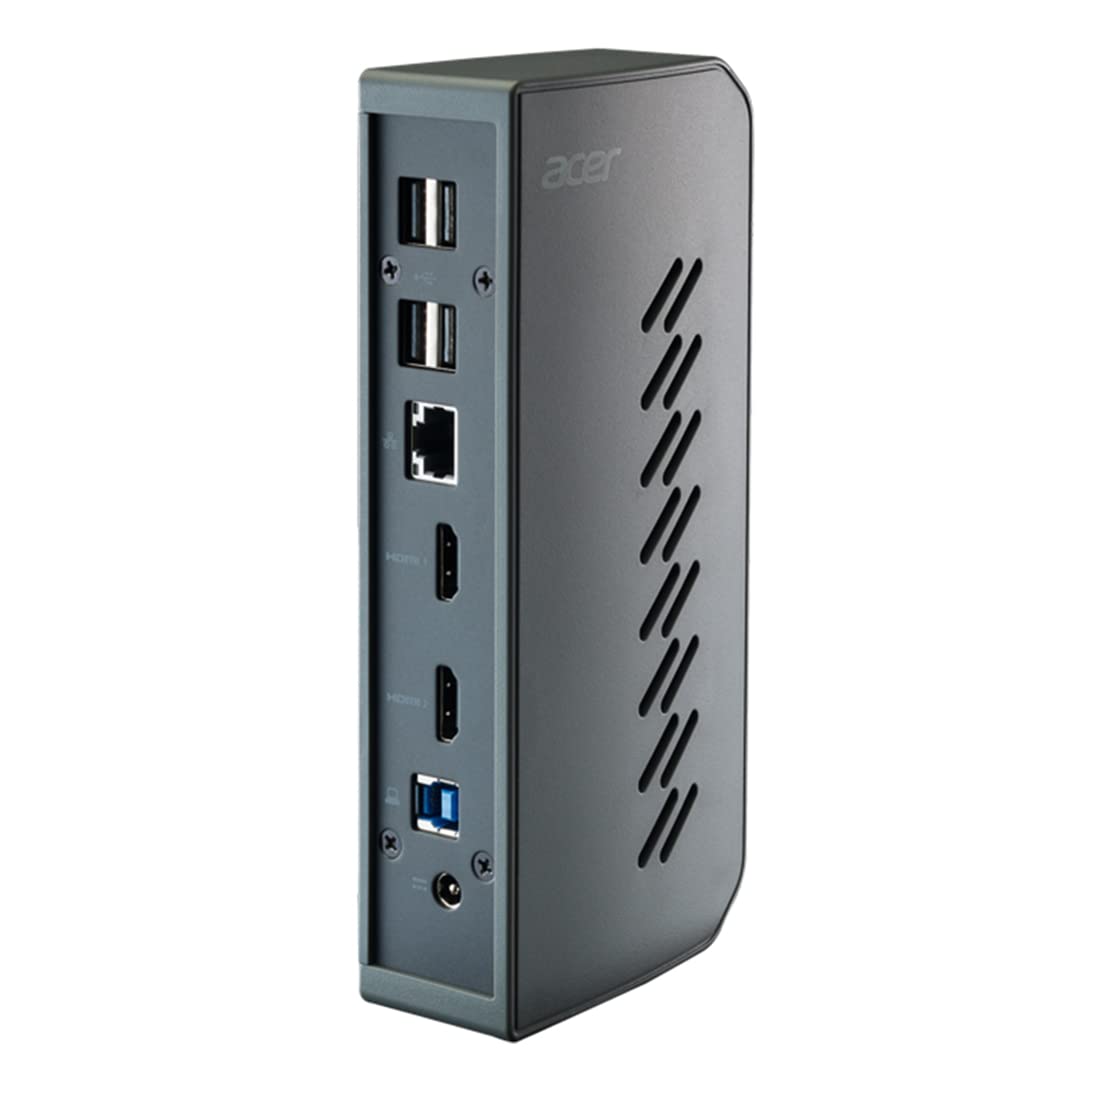 Acer U301 USB 3.0 Dock for Windows | 2 x HDMI ports | 2 USB 3.1 Gen 1 ports | 4 USB 2.0 Ports | Gigabit Ethernet | Requires One USB 3.1 Type A or USB 3.1 Type-C on Computer | Gray